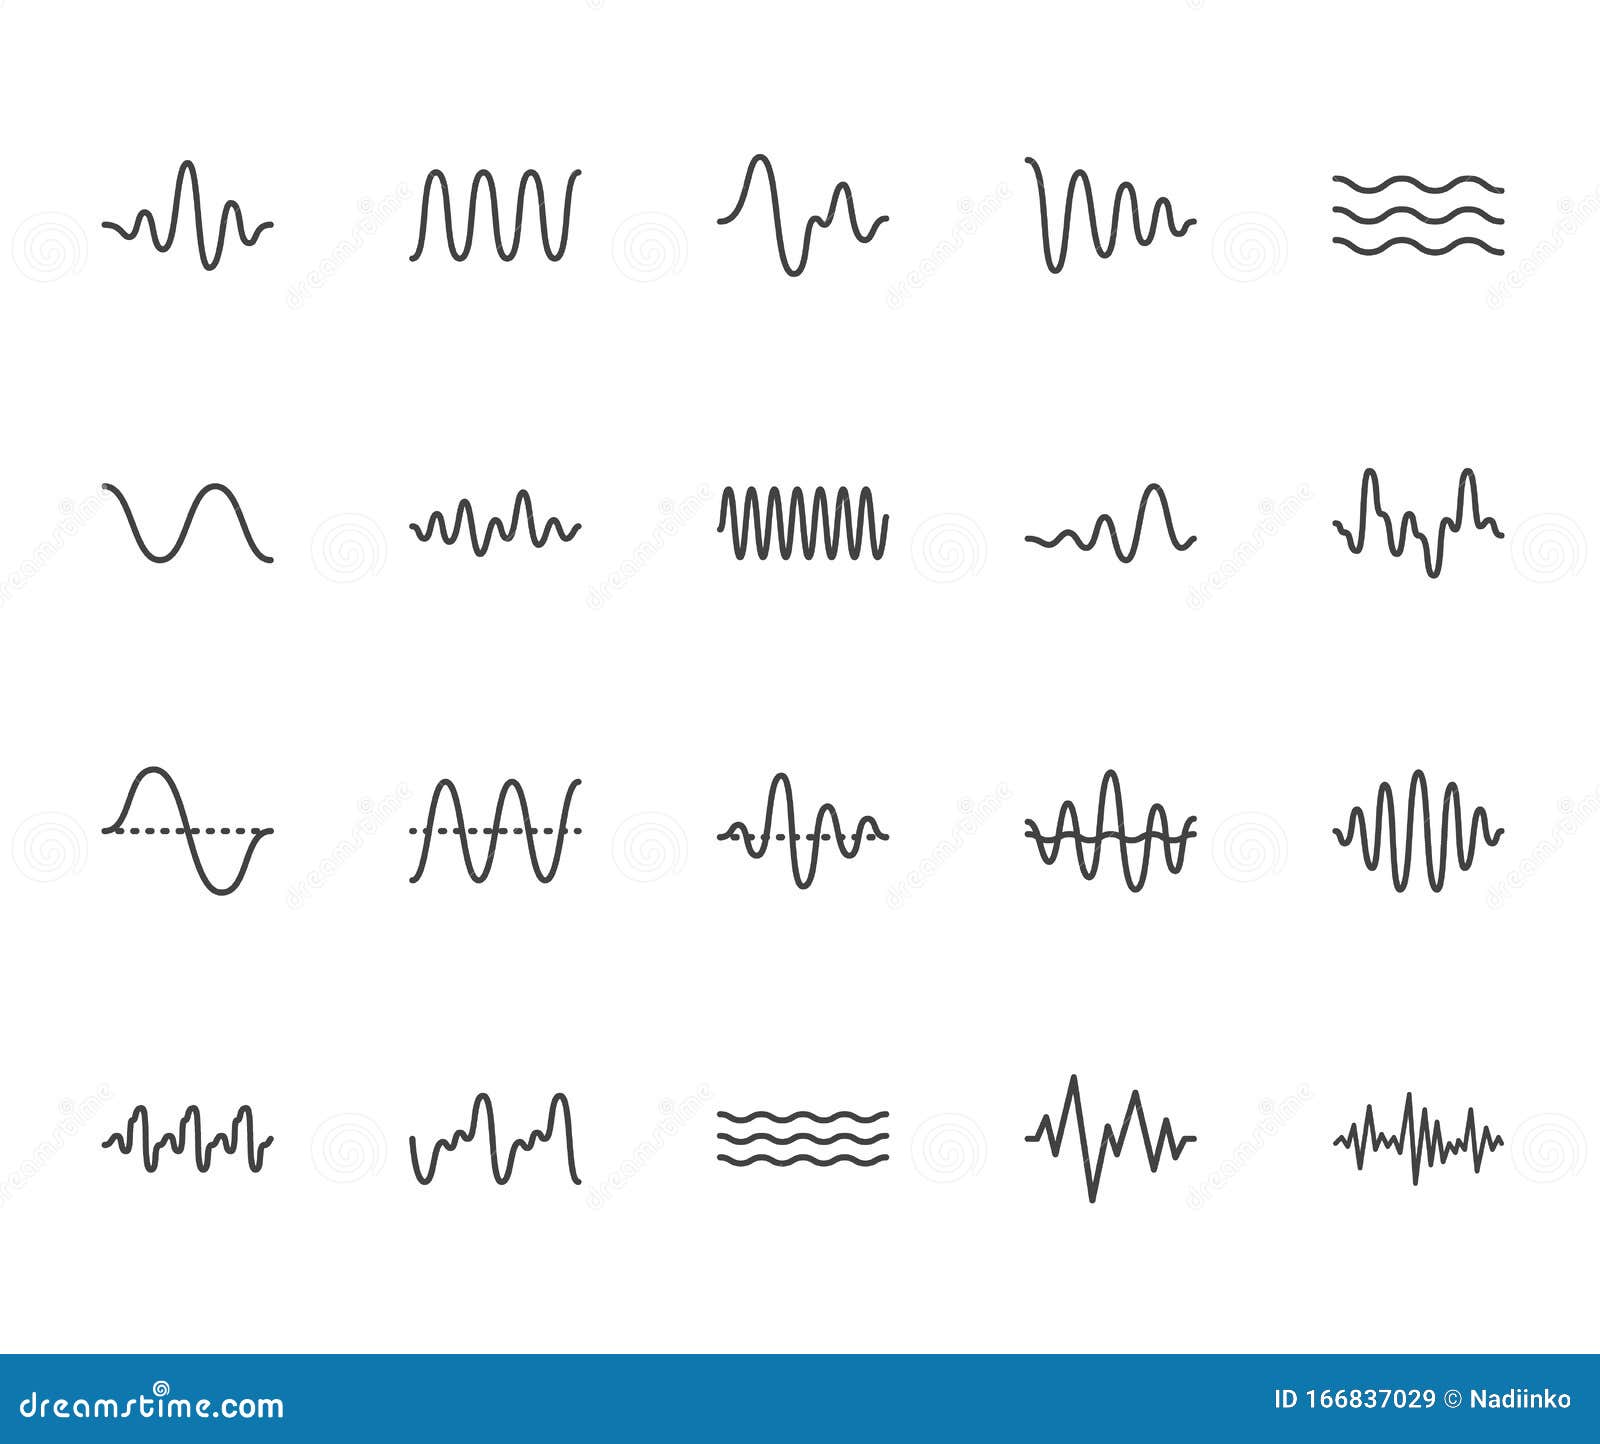 sound waves flat line icons set. vibration, soundwave, audio voice signal, abstract waveform frequency 